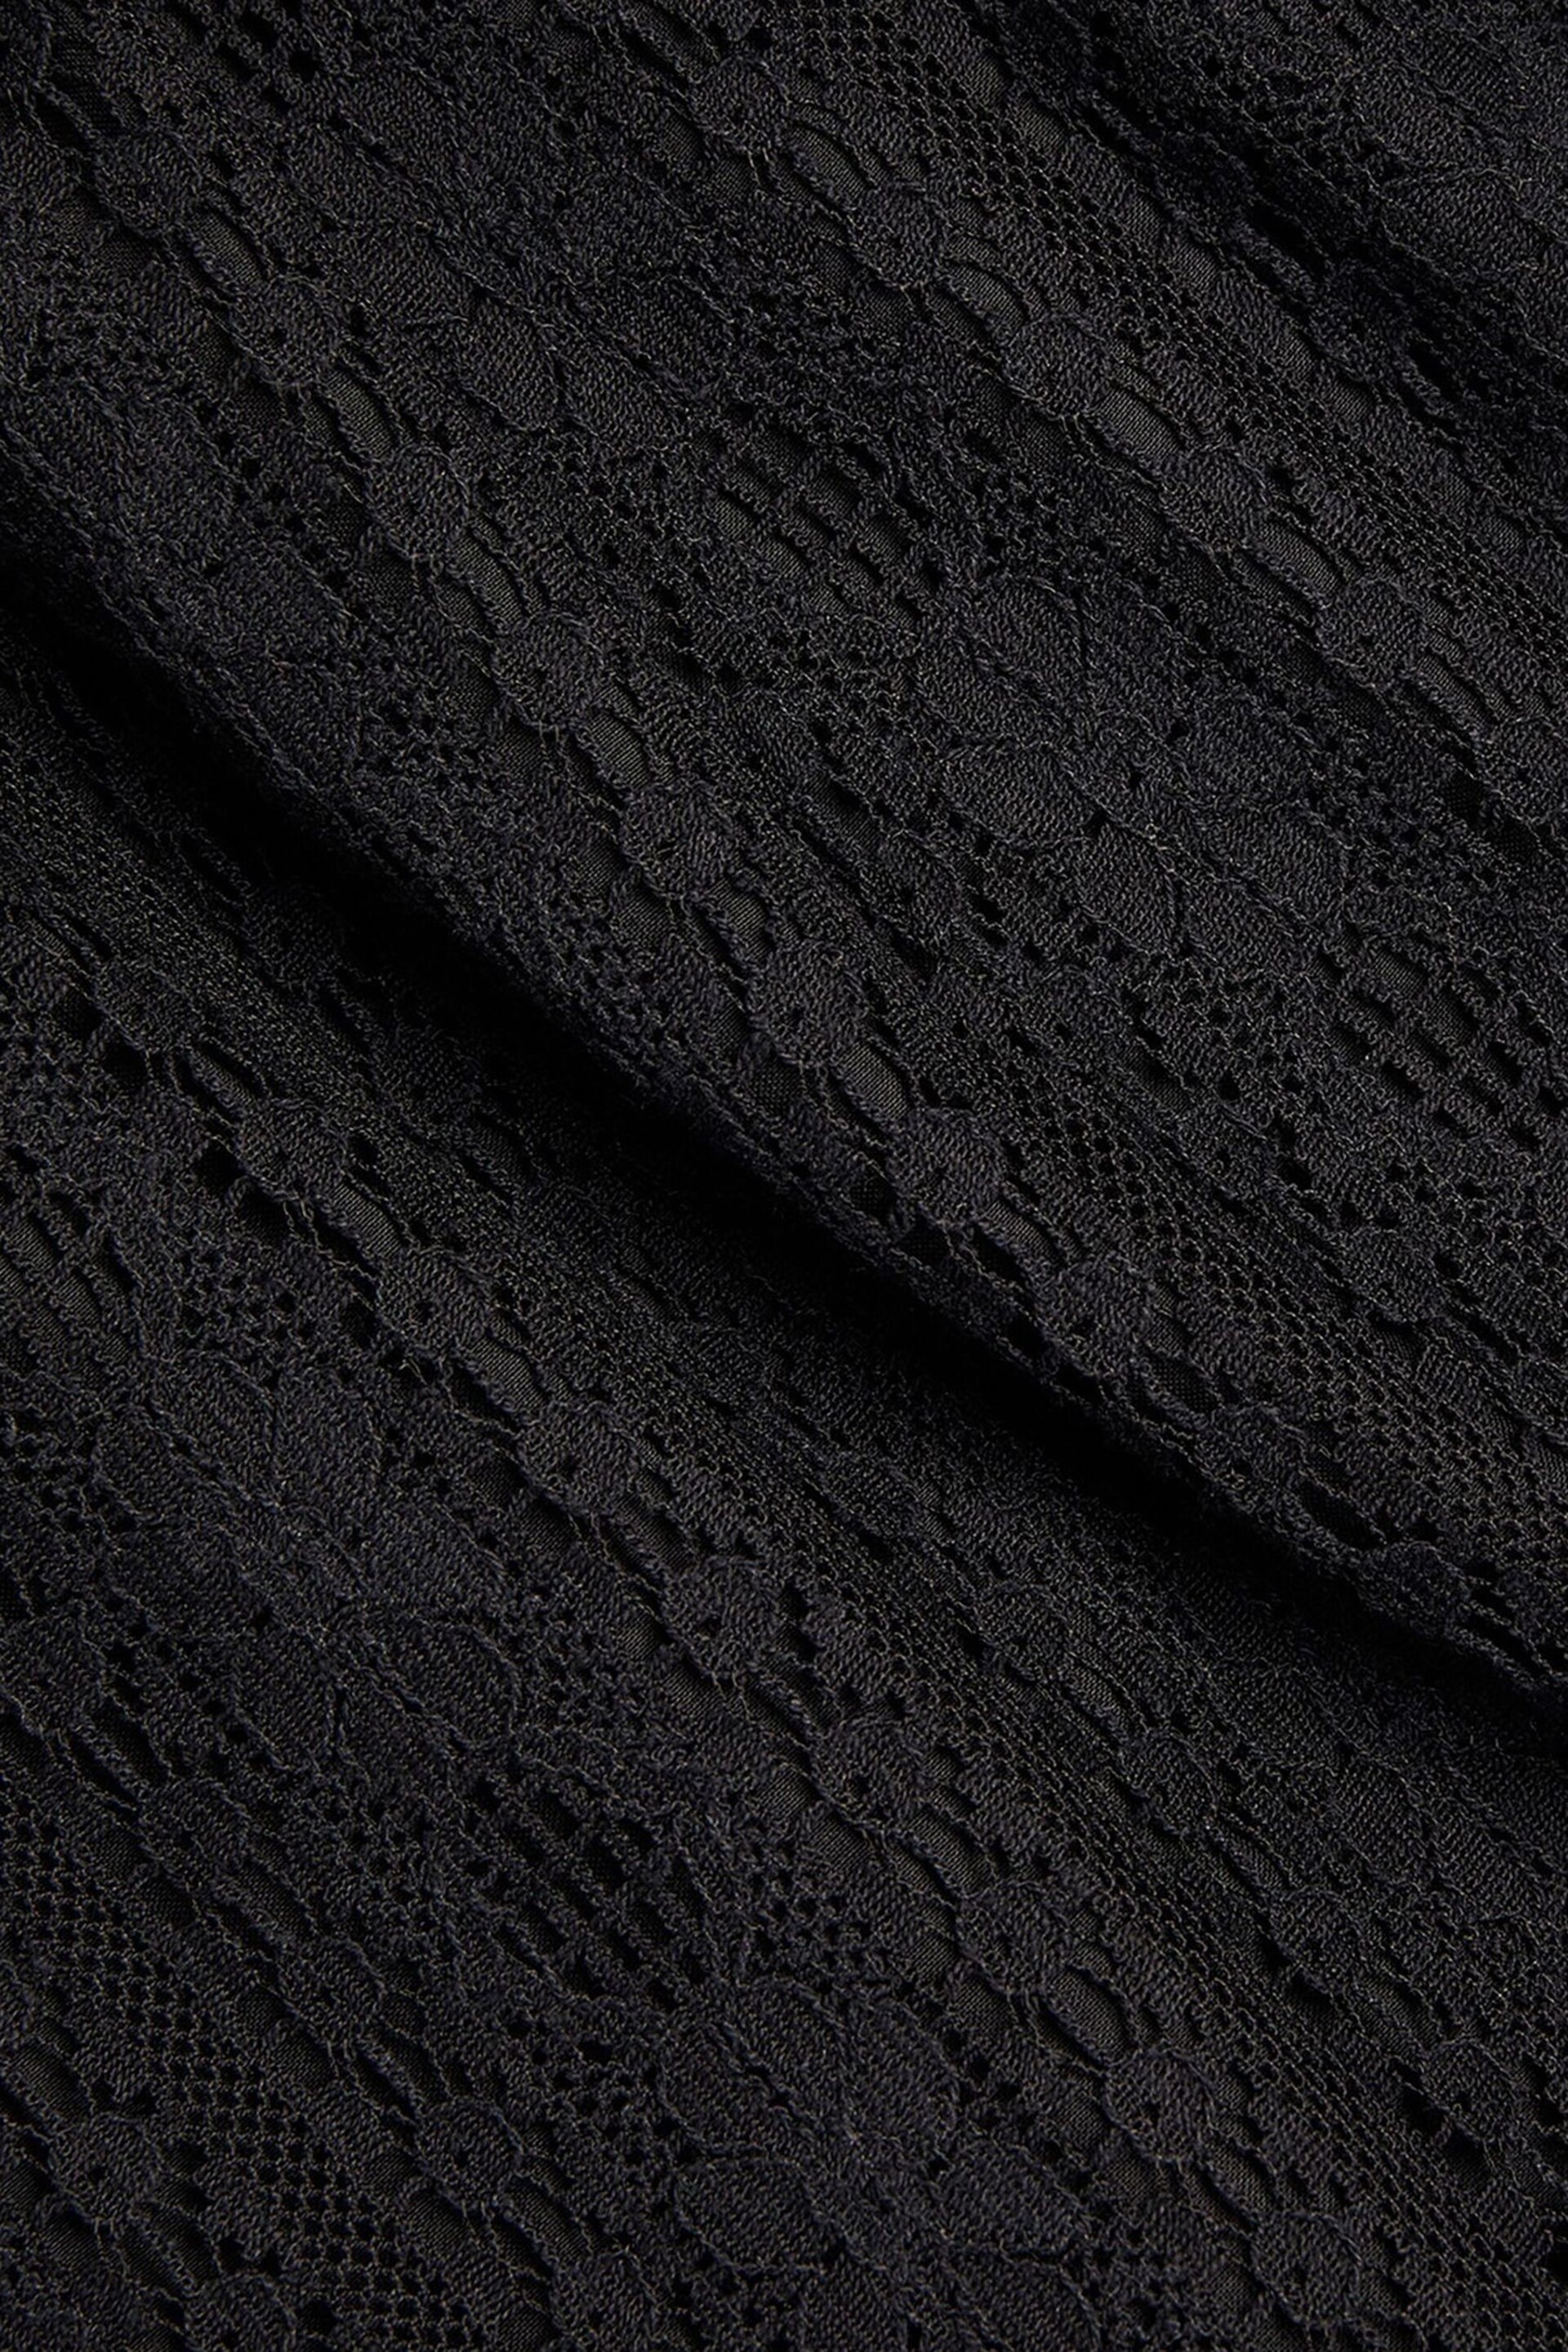 Monsoon Black Lace Cut Out Dress - Image 3 of 3